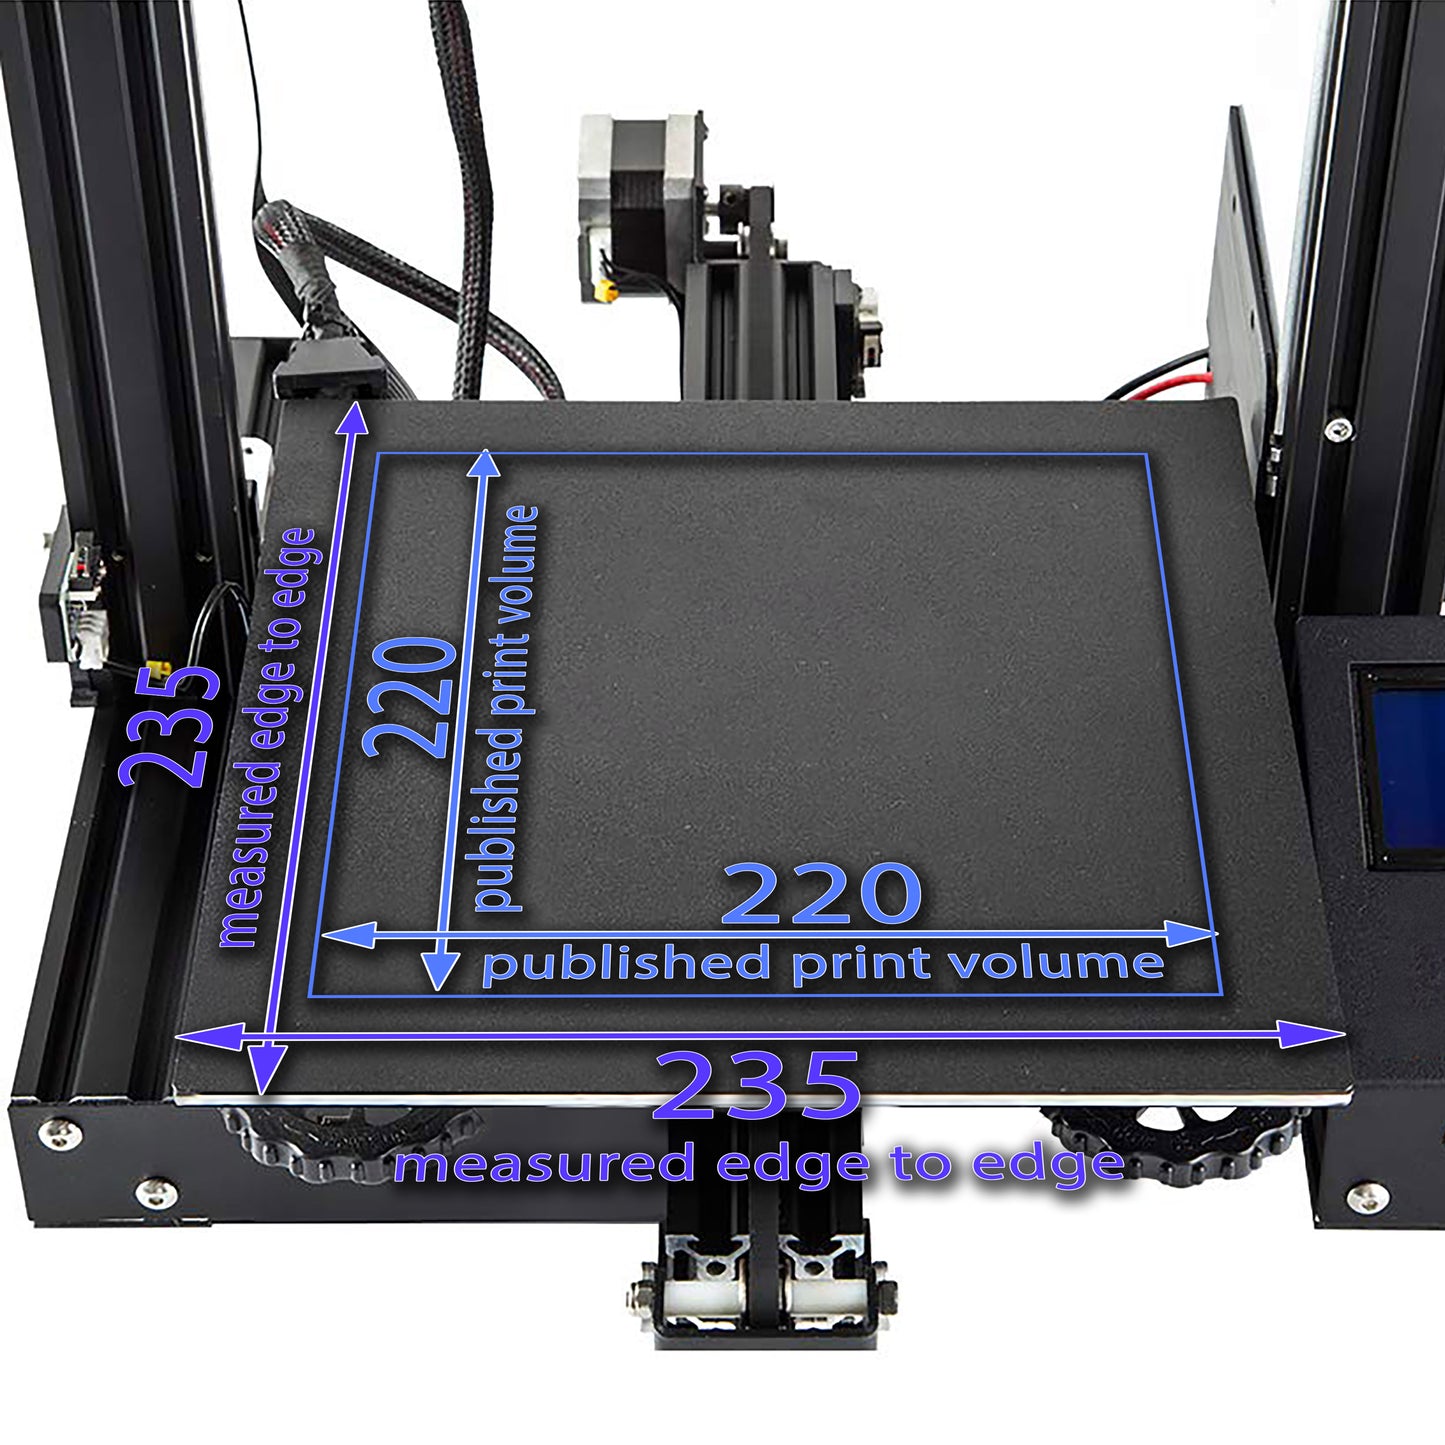 510 x 510 Kit with Pre-Installed PEX Build Surface - Creality CR-10 S5